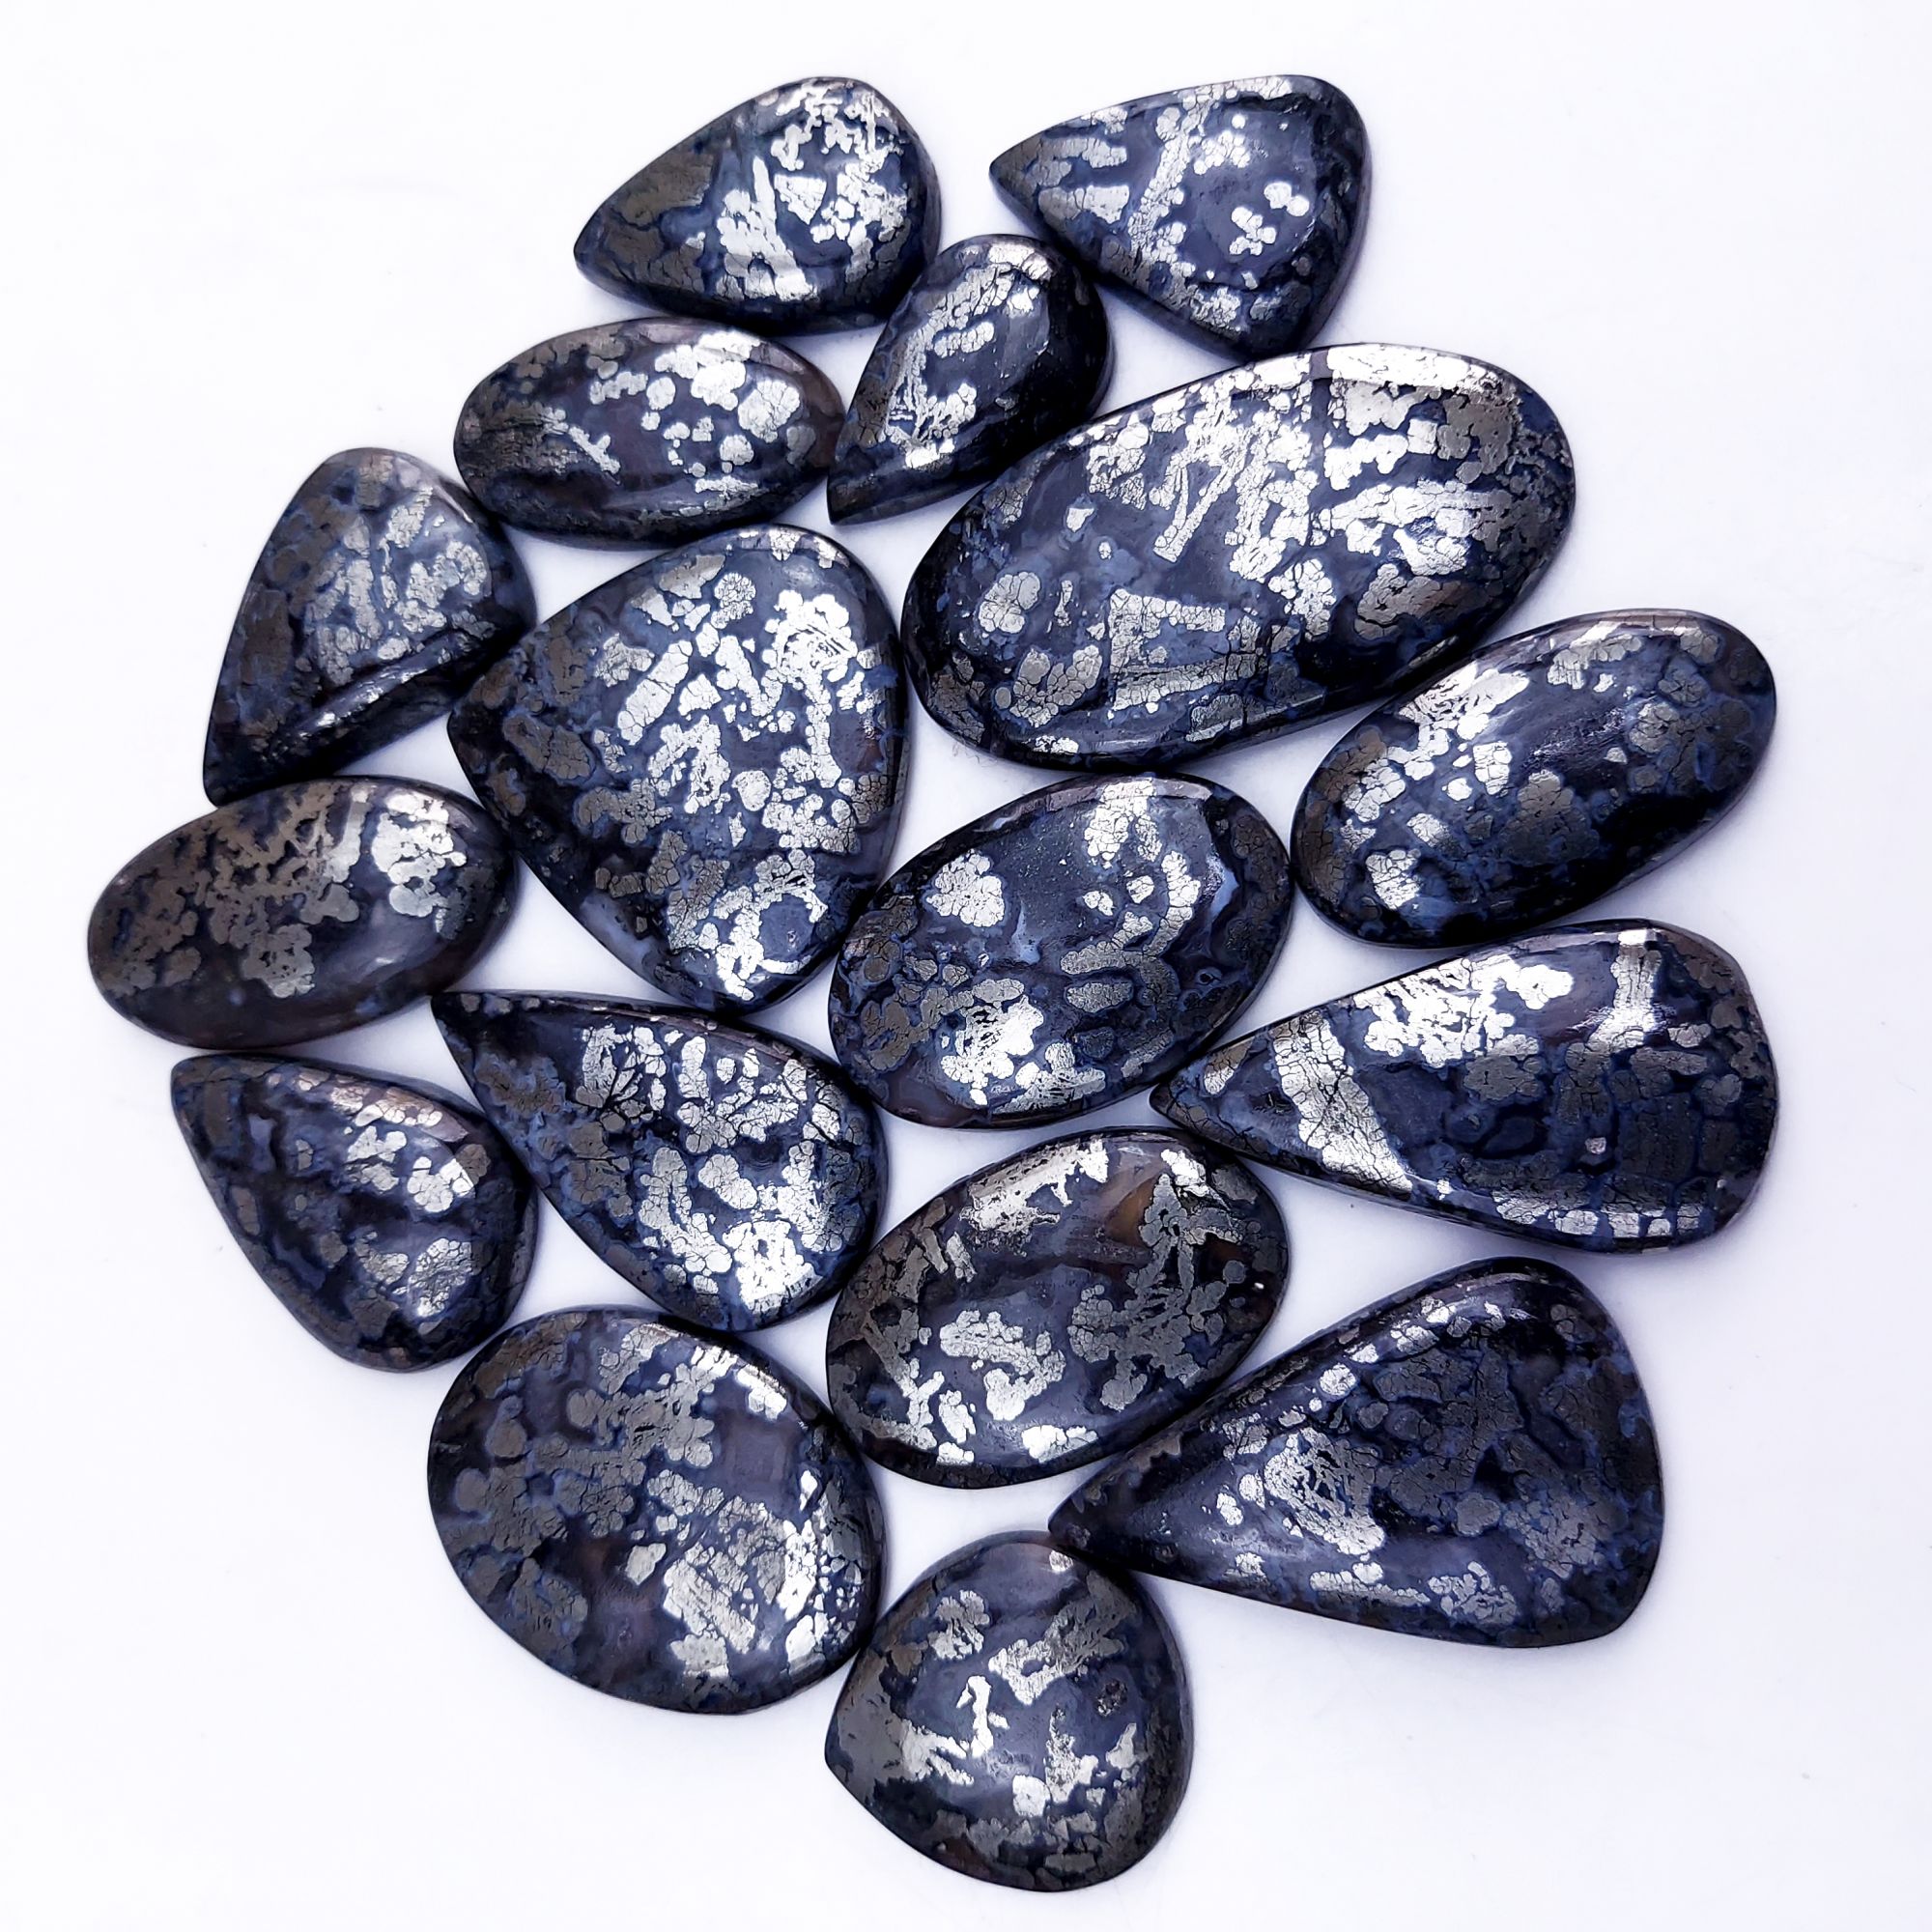 17Pcs 1030Cts Natural Marcasite Grey Cabochon Back Side Unpolished Gemstone Semi-Precious Gemstones For Jewelry Making 48x26 25x17mm #10032